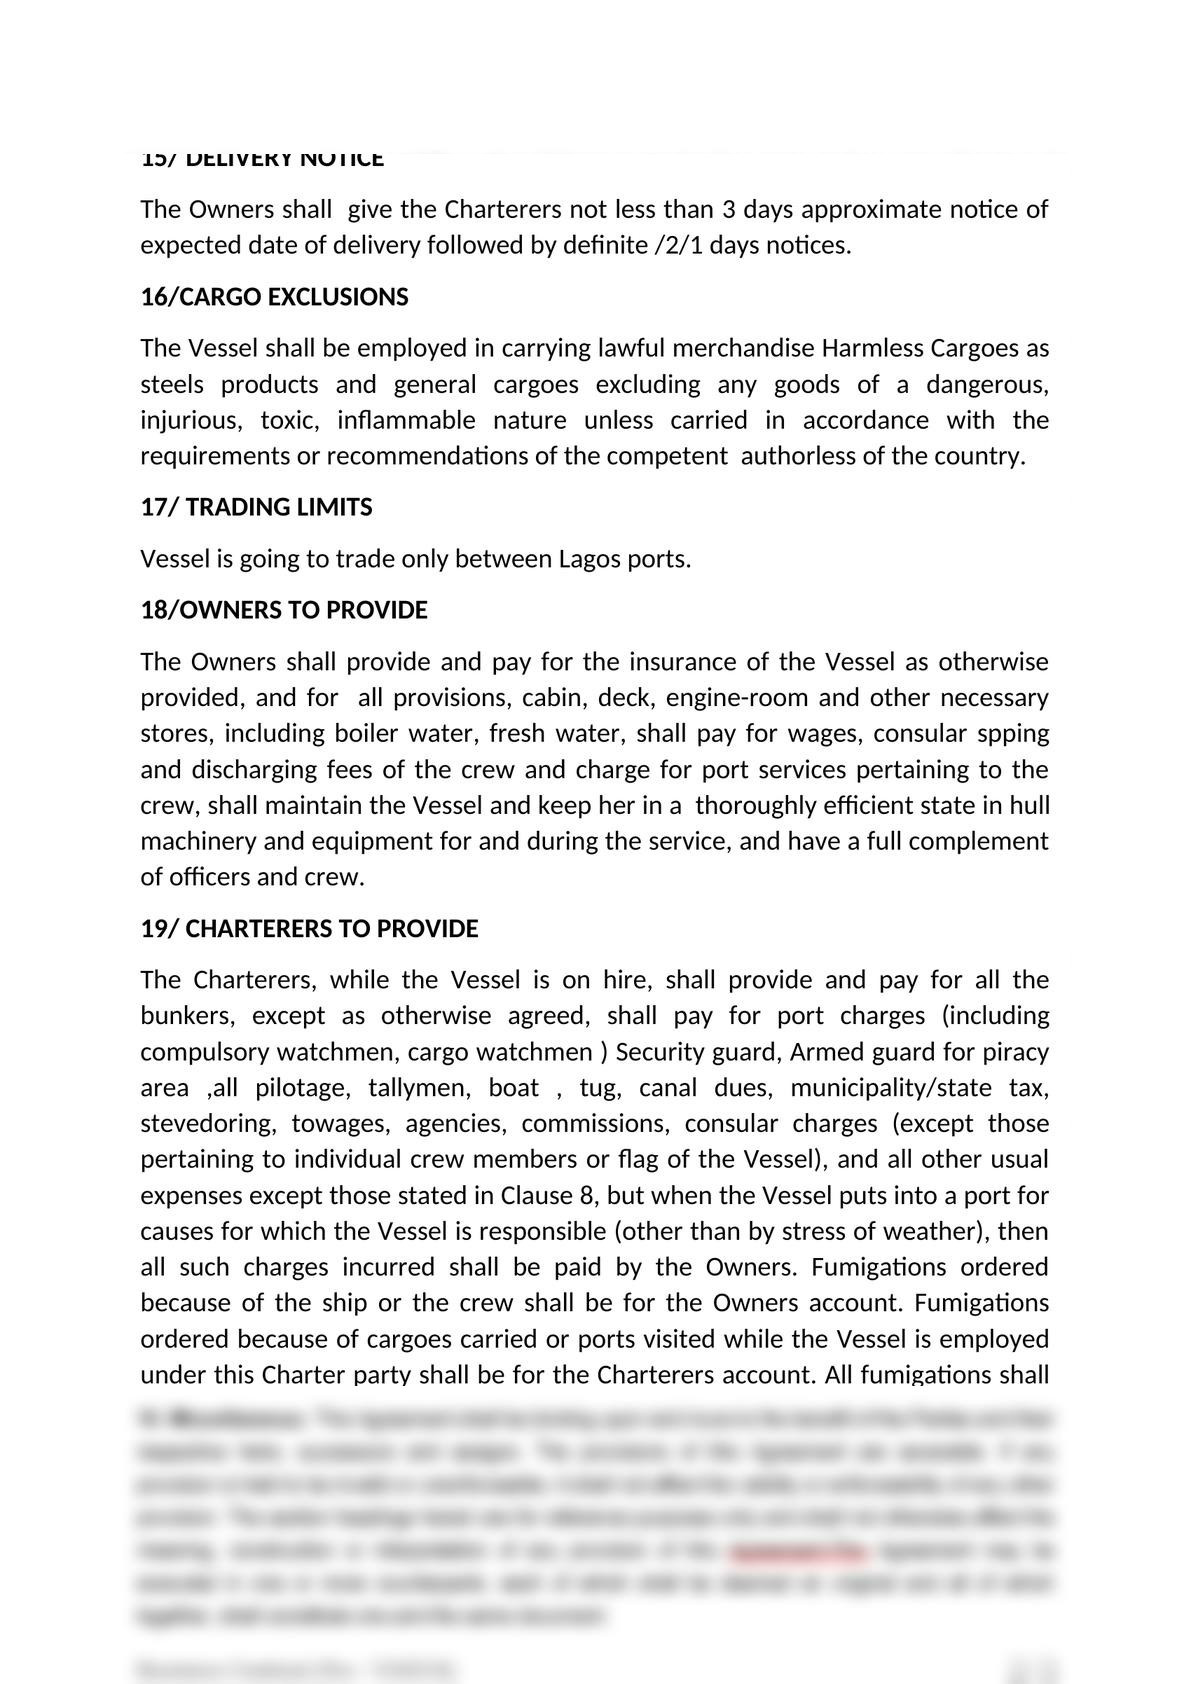 charter party agreement in cameroon-2